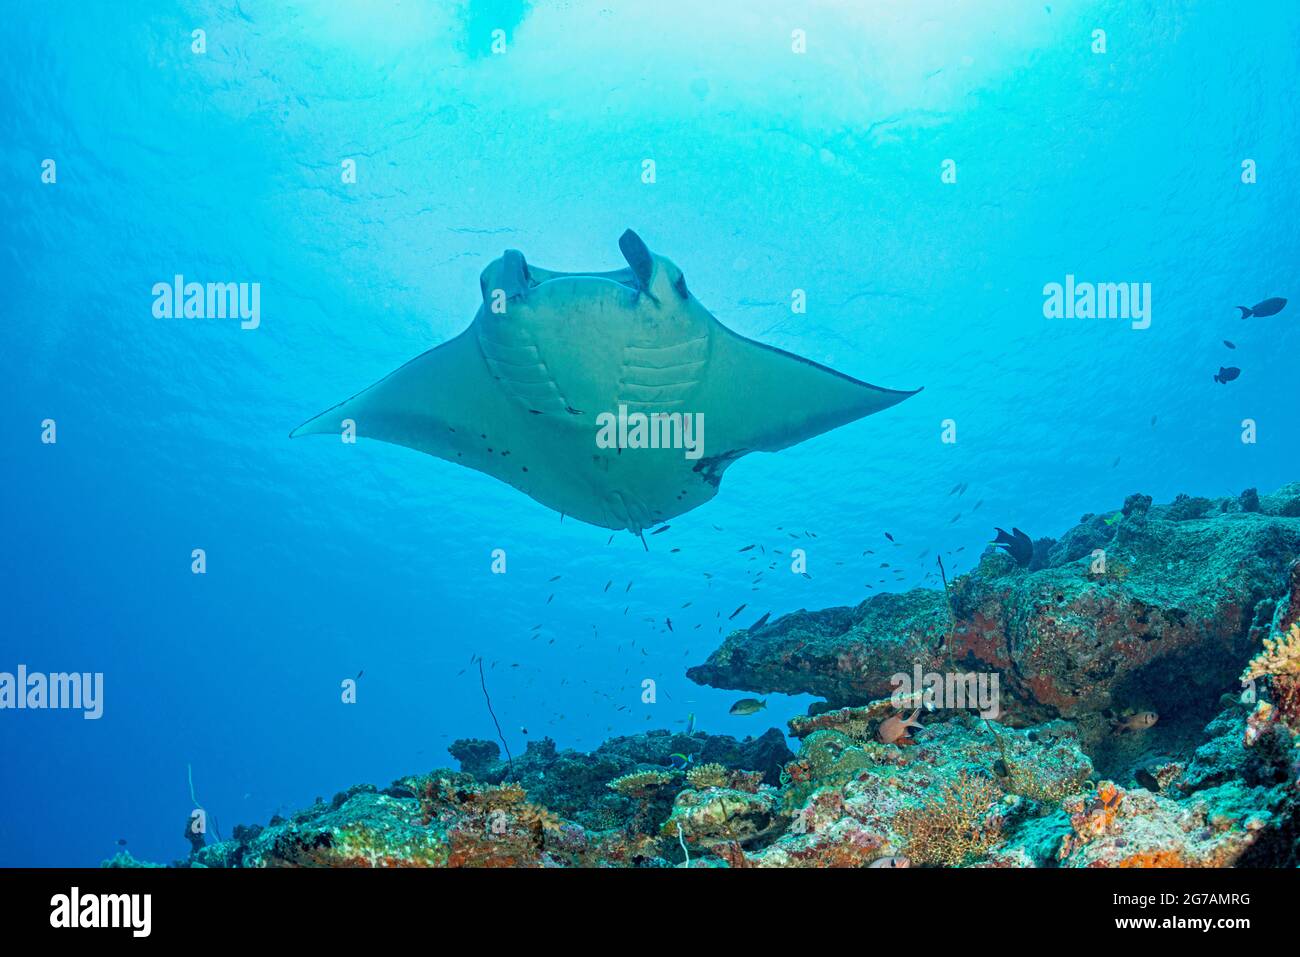 Giant manta ray (Mobula birostris, Syn .: Manta birostris), a type of ray from the family of devil rays, manta rays are the largest rays in the oceans Stock Photo